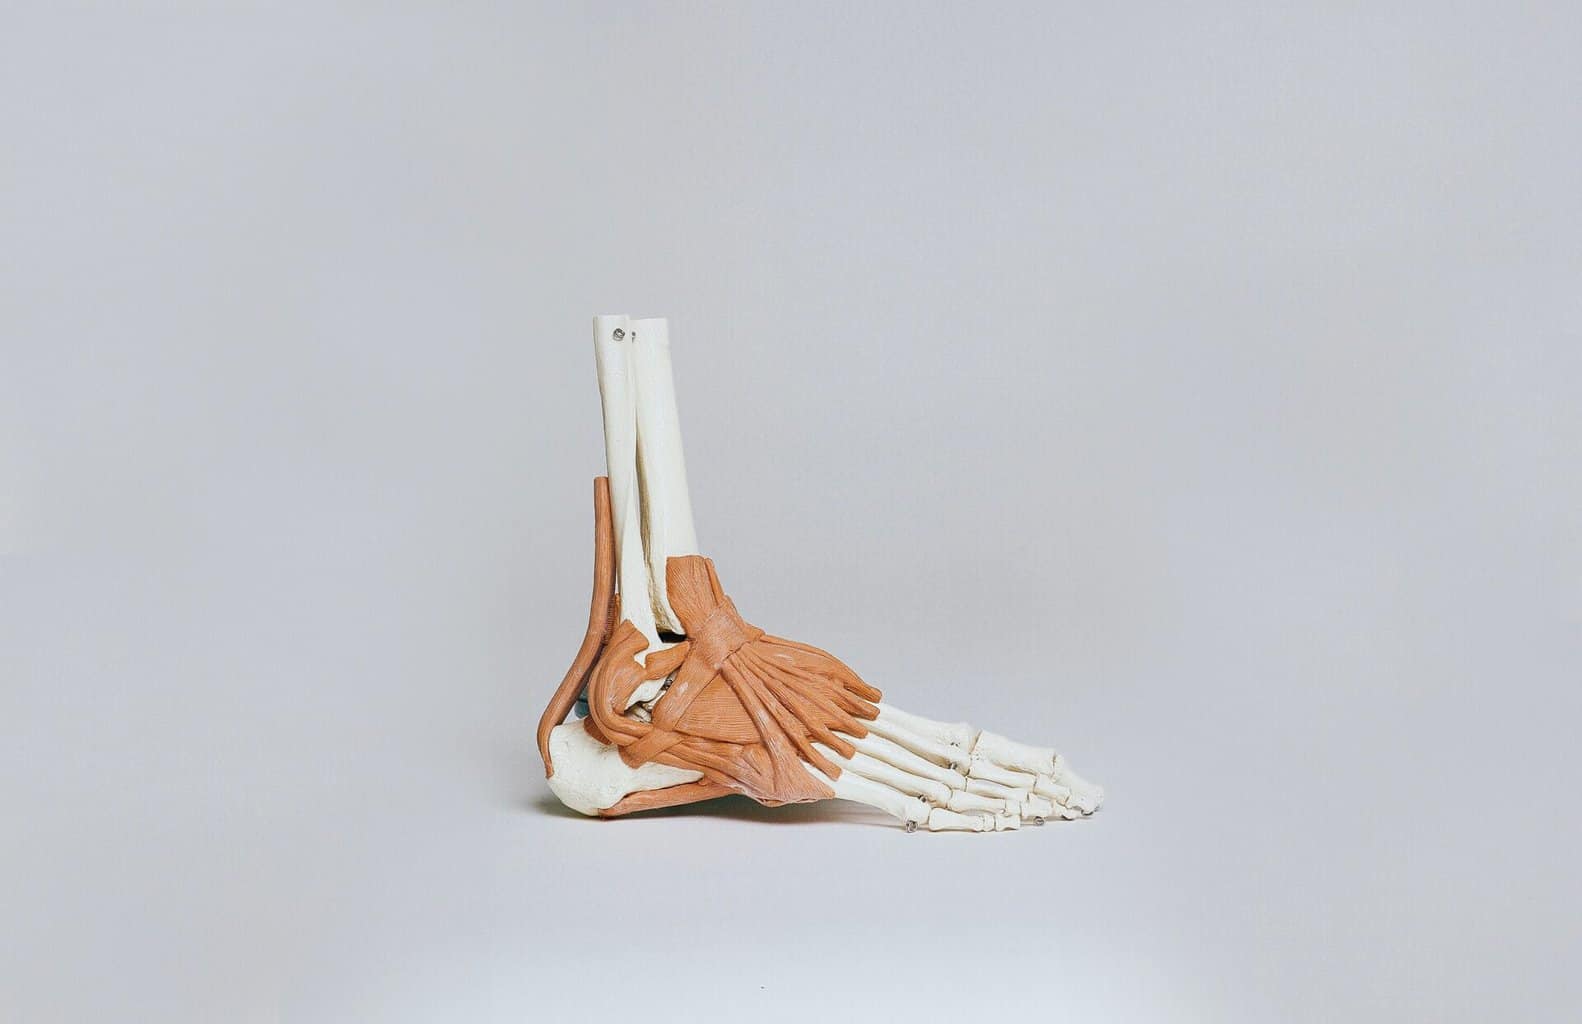 Foot muscles and skeleton: what causes plantar fasciitis